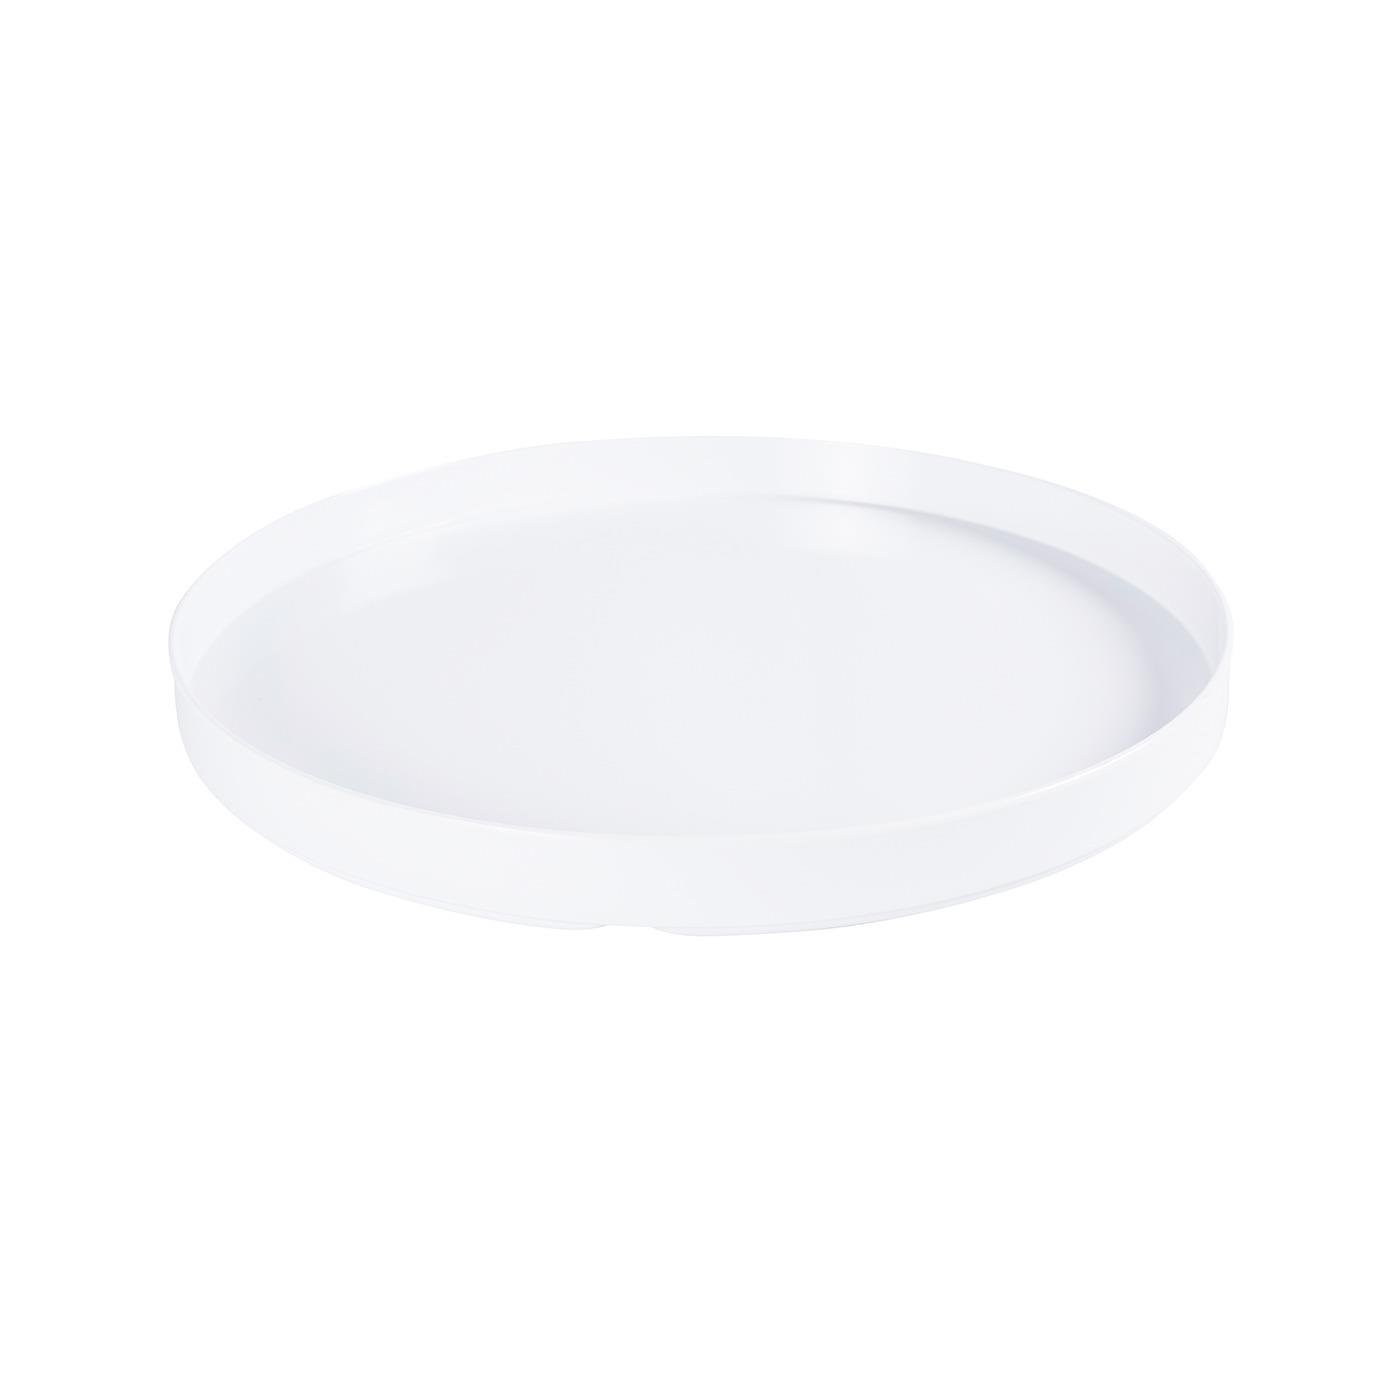 White Lacquer Tray 13" - Round